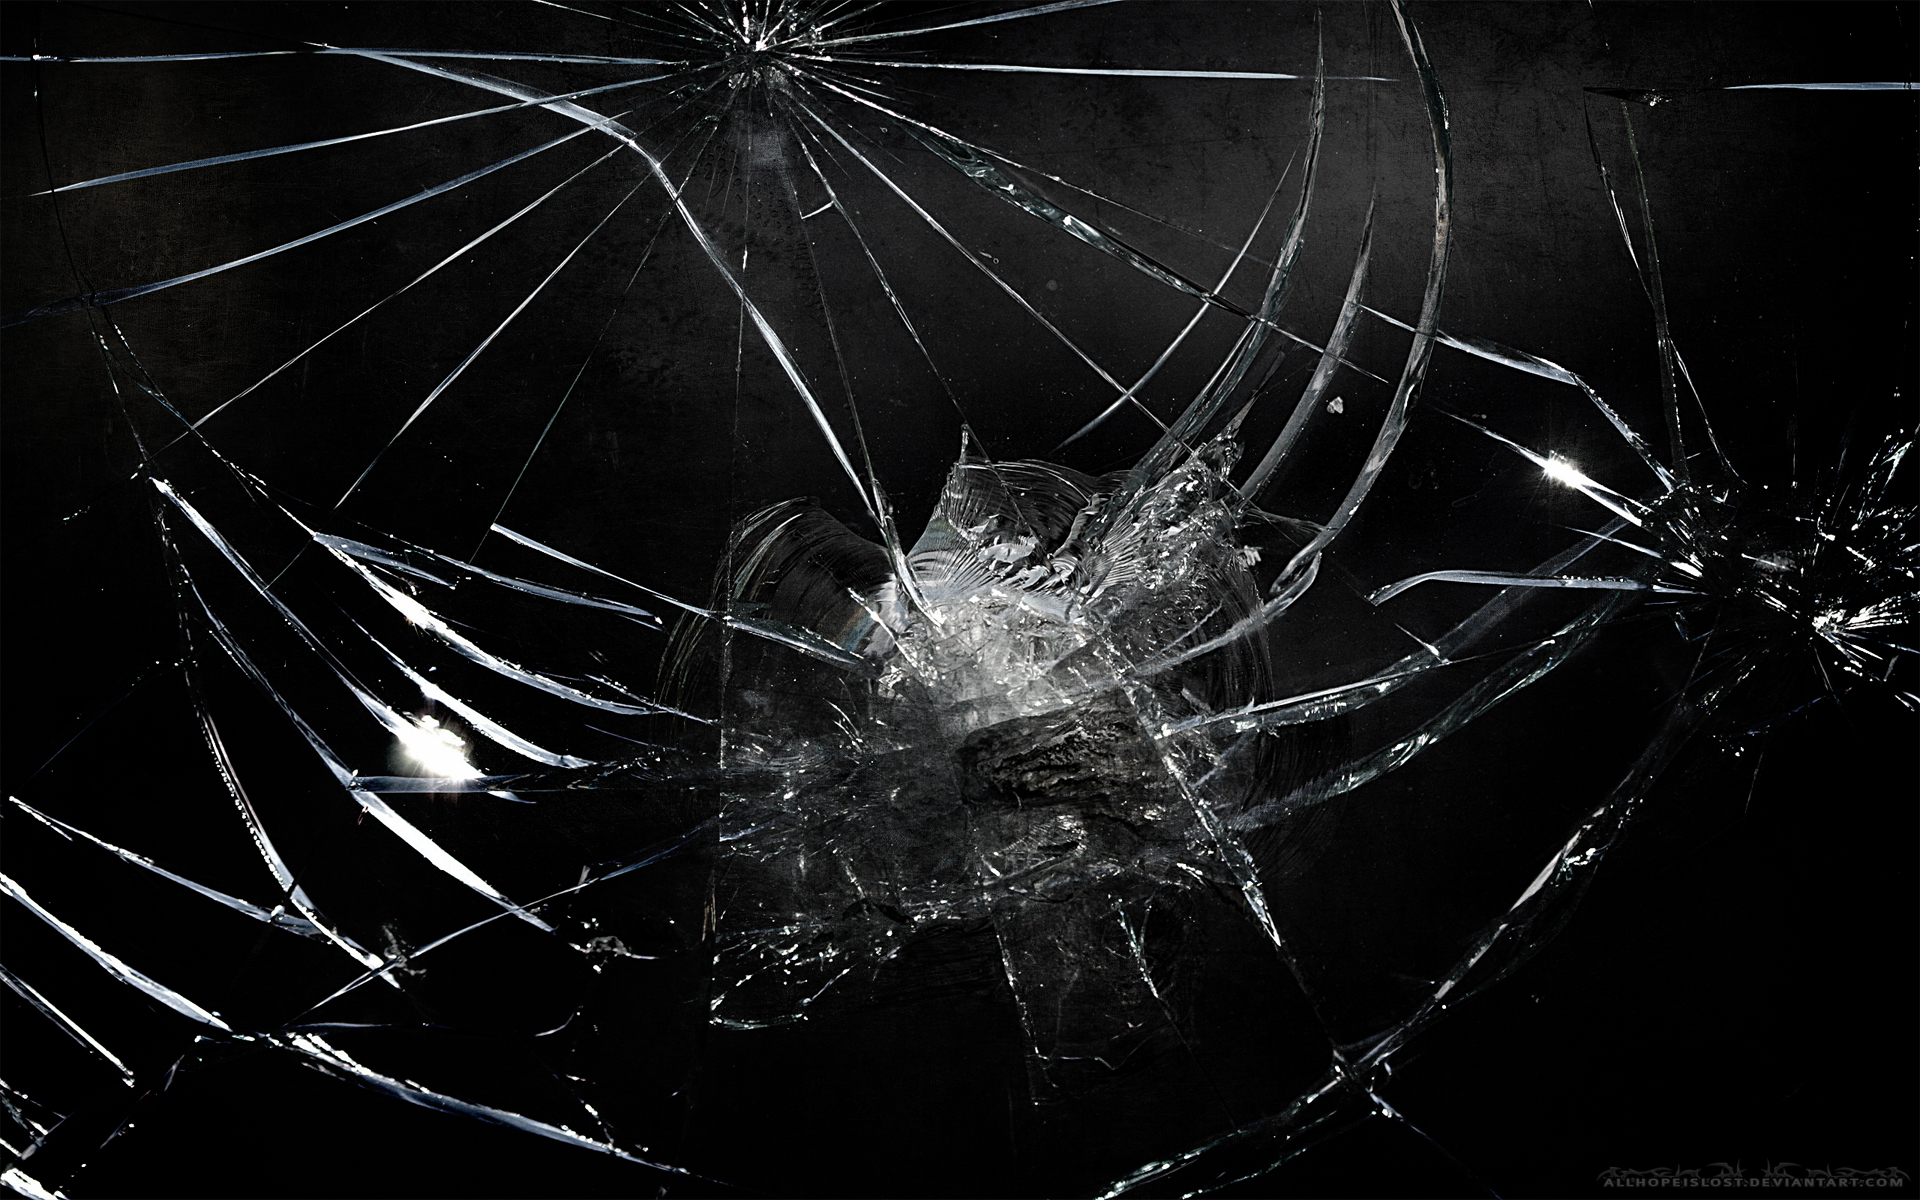 Cracked Screen Backgrounds, Compatible - PC, Mobile, Gadgets| 1920x1200 px